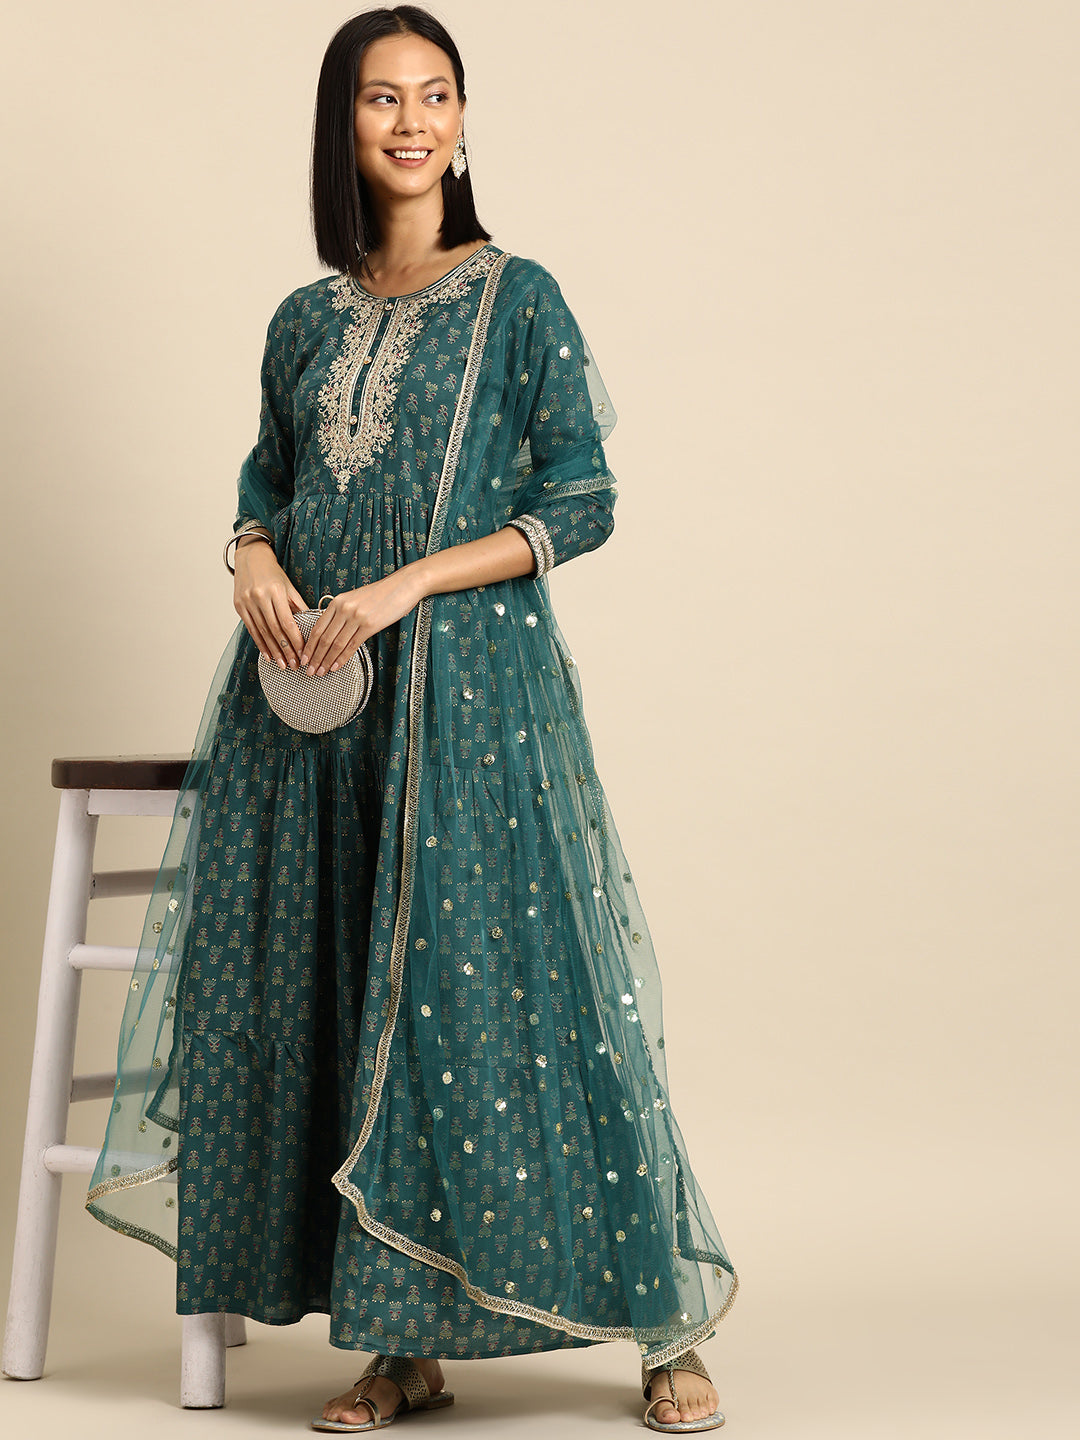 Nayo Women Blue Printed Anarkali Kurta Price in India, Full Specifications  & Offers | DTashion.com